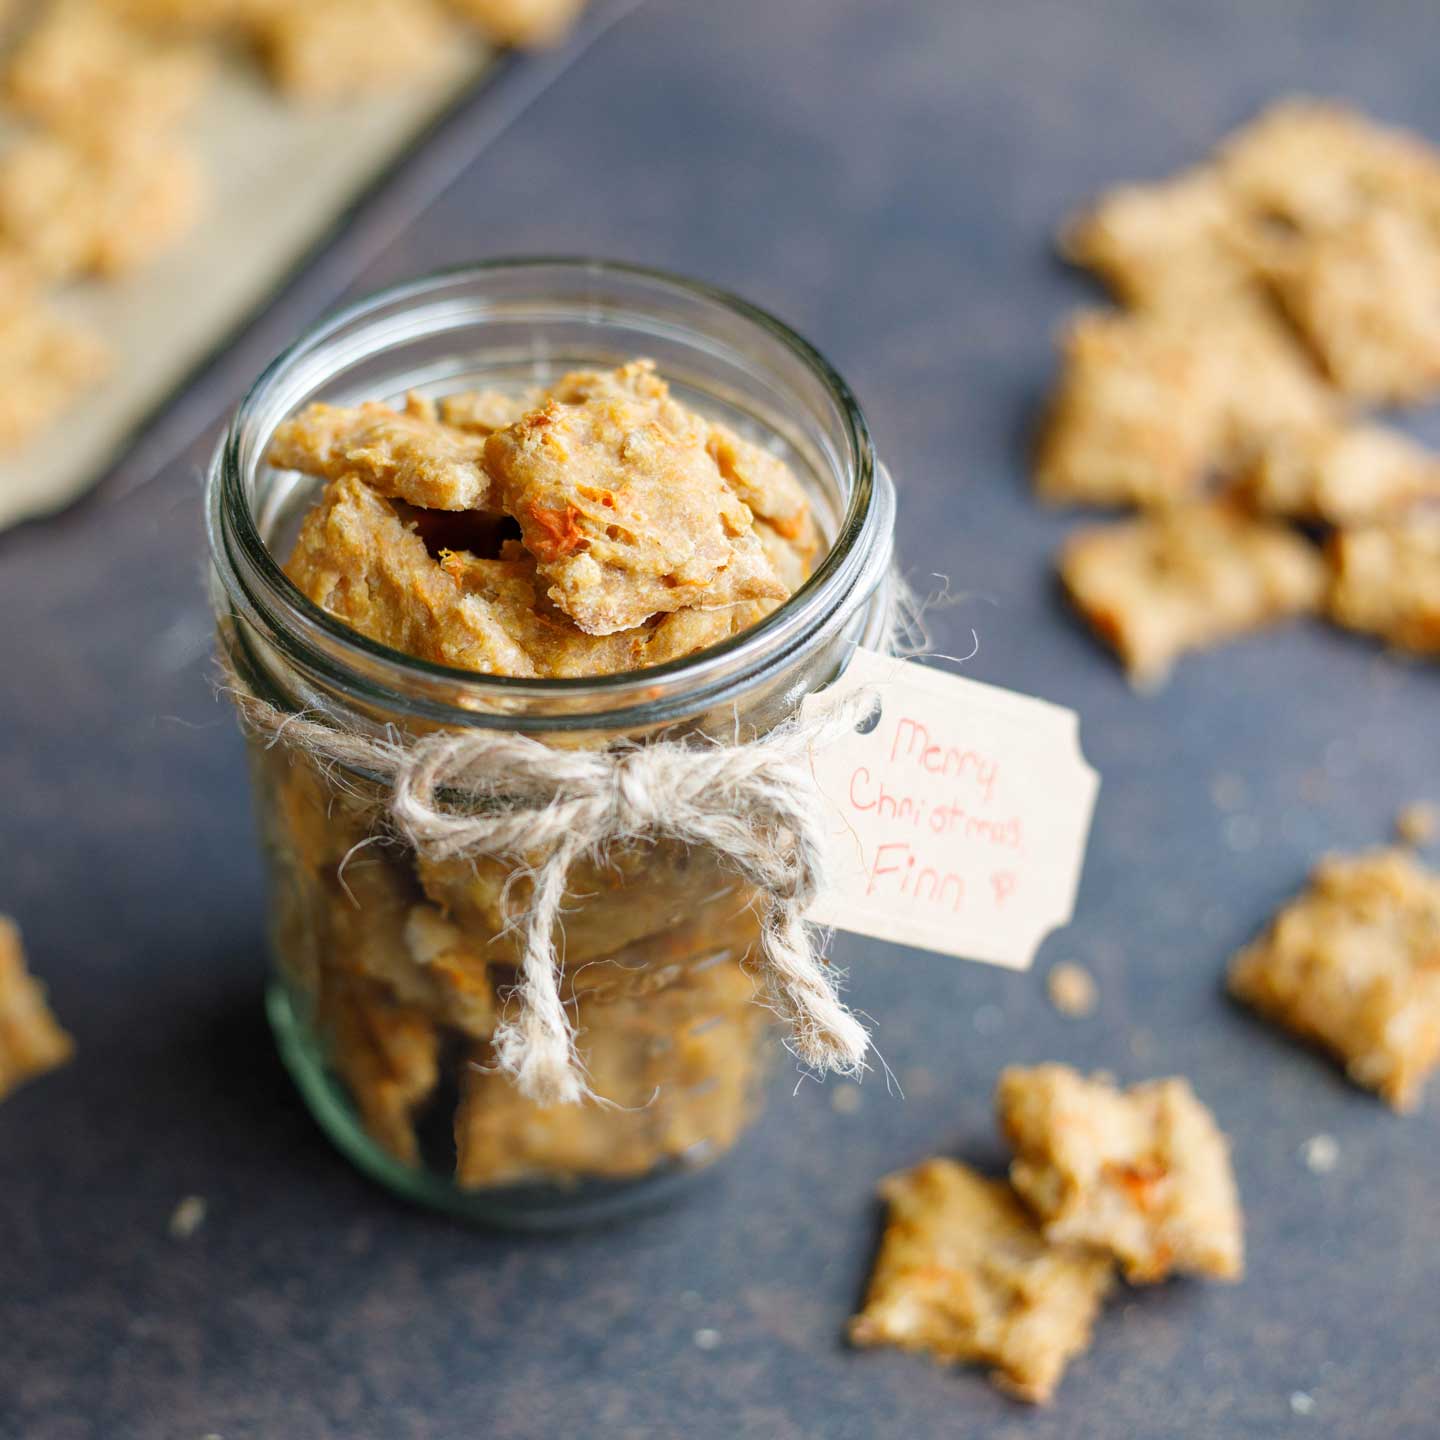 Just 4 simple ingredients (including leftover Thanksgiving turkey, or leftover chicken)! These easy Homemade Dog Treats are the perfect way to use up those leftovers – and they even feature a little pup-pleasing sweetness from sweet potatoes. Picky-dog approved! Even better, though? They freeze beautifully, and make darling DIY holiday gifts for all the special pups in your life!